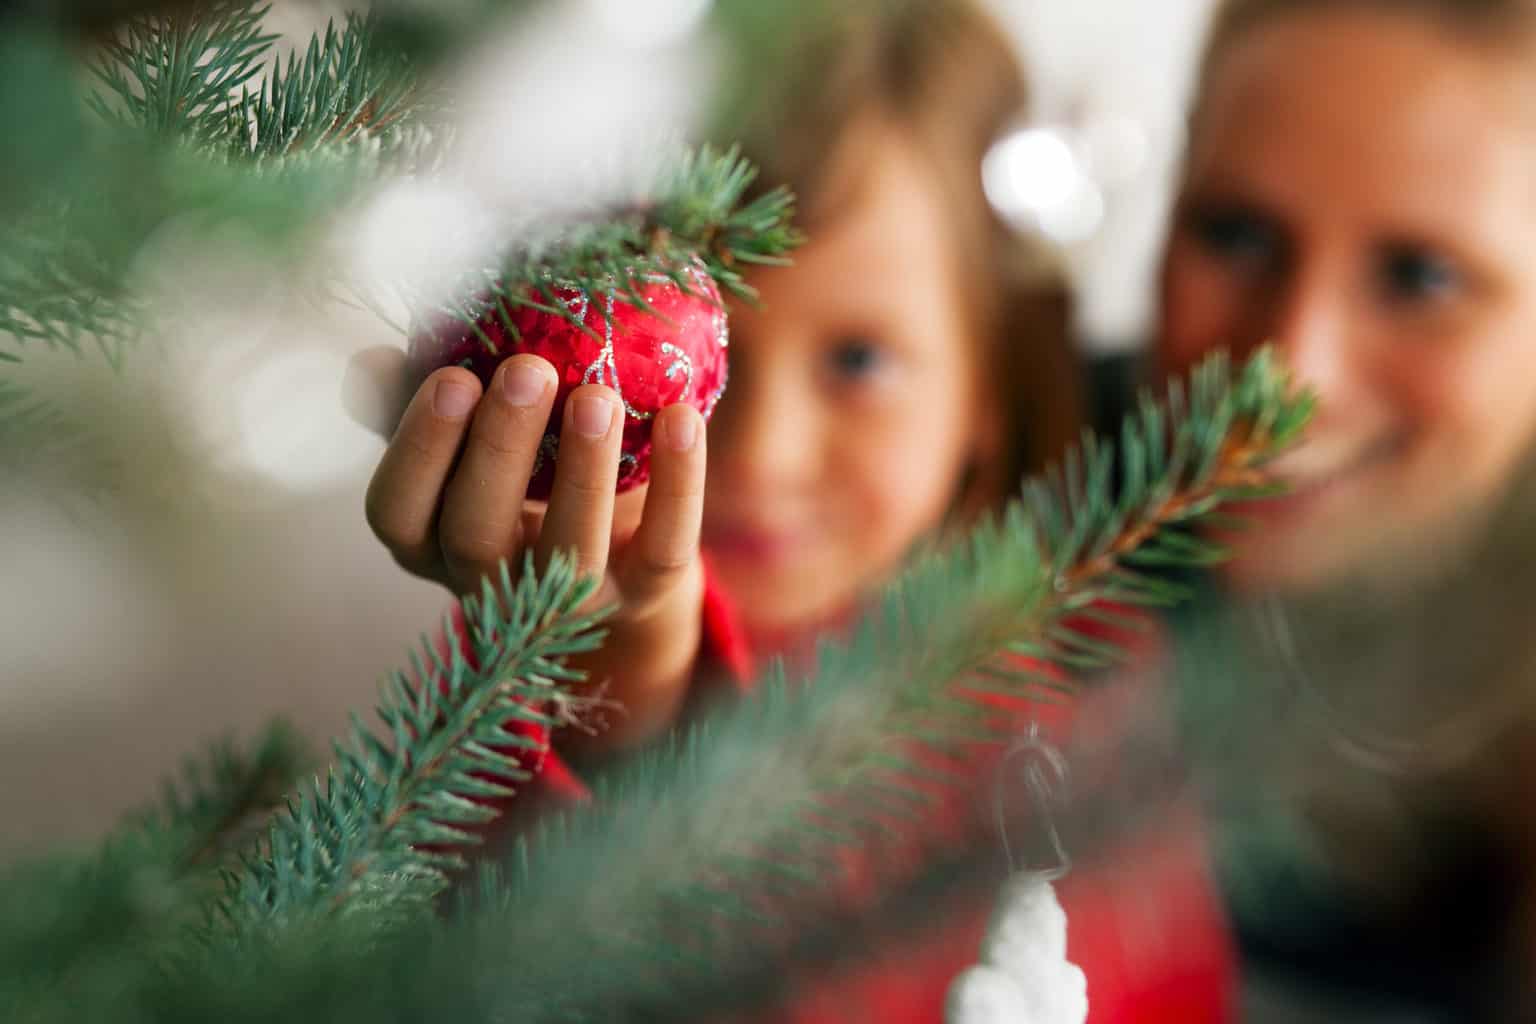 5 Fun Ways to Have a Socially Distant Christmas With Your Kids